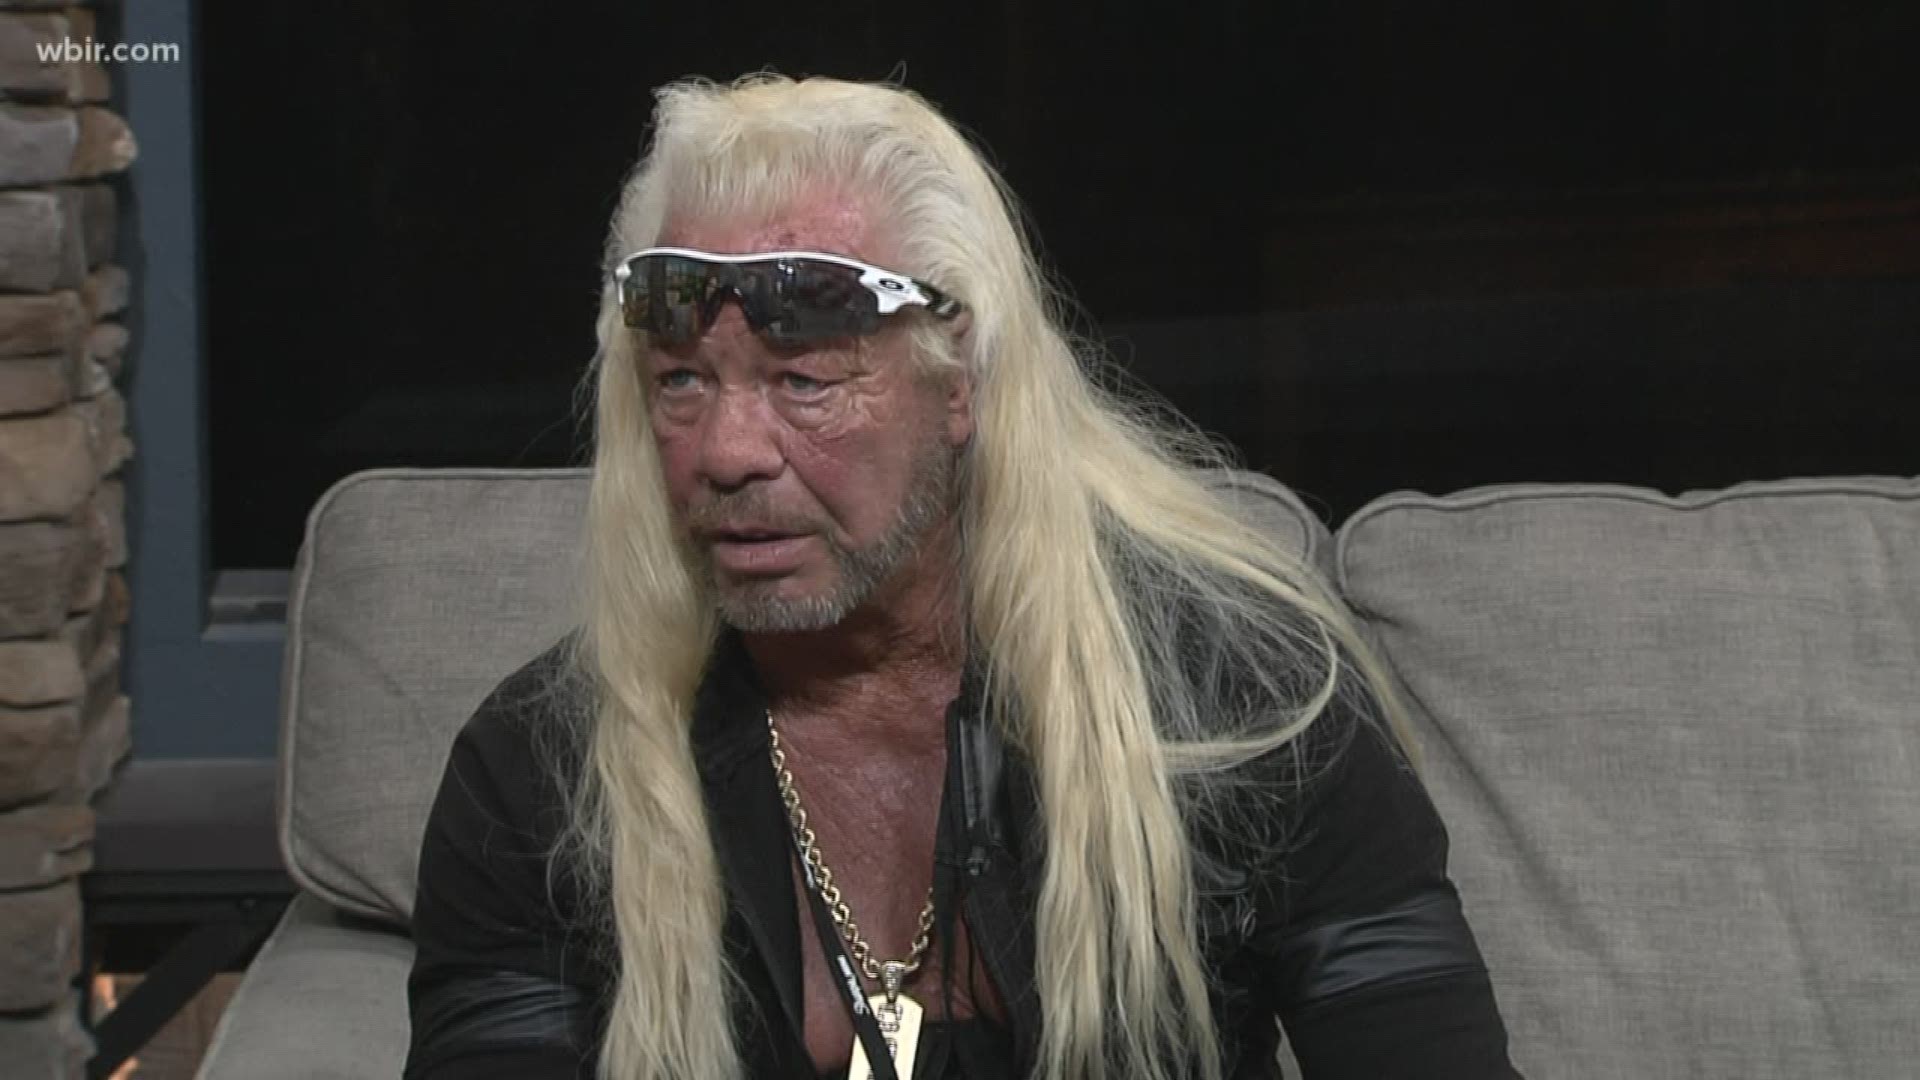 Dog the Bounty Hunter is excited to meet his fans at Knoxville's BubbaFest. He's also talking about his new show, the loss of his wife, and trying to make a difference.